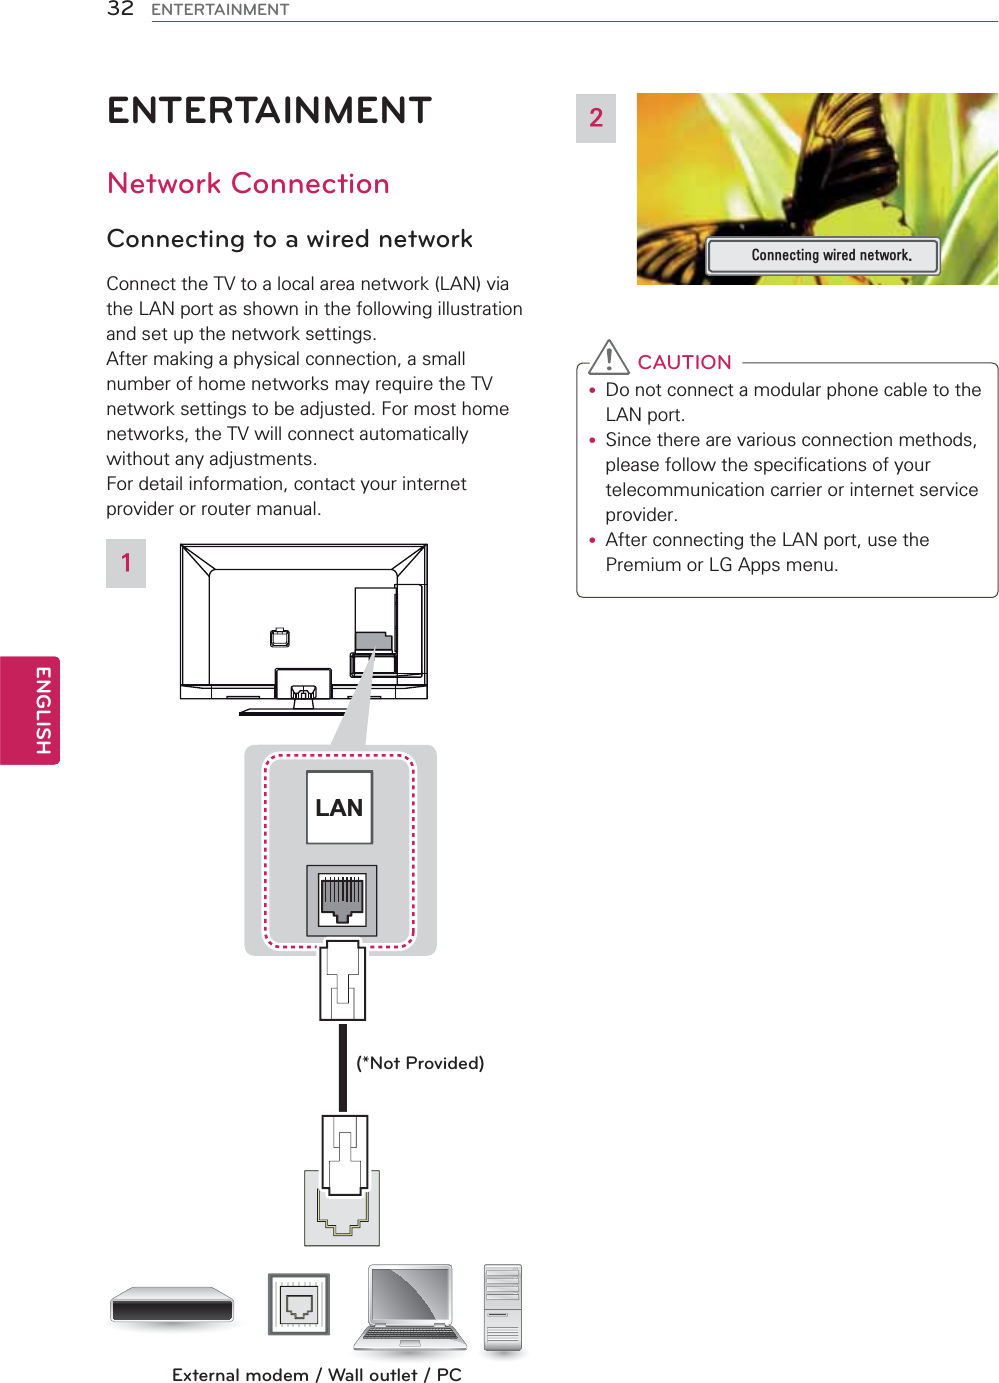 32ENGENGLISHENTERTAINMENTENTERTAINMENTNetwork ConnectionConnecting to a wired networkConnect the TV to a local area network (LAN) via the LAN port as shown in the following illustration and set up the network settings.After making a physical connection, a small number of home networks may require the TV network settings to be adjusted. For most home networks, the TV will connect automatically without any adjustments. For detail information, contact your internet provider or router manual.LANExternal modem / Wall outlet / PC(*Not Provided)1&amp;RQQHFWLQJZLUHGQHWZRUN2 CAUTIONy Do not connect a modular phone cable to the LAN port.y Since there are various connection methods, please follow the specifications of your telecommunication carrier or internet service provider.y After connecting the LAN port, use the Premium or LG Apps menu.  